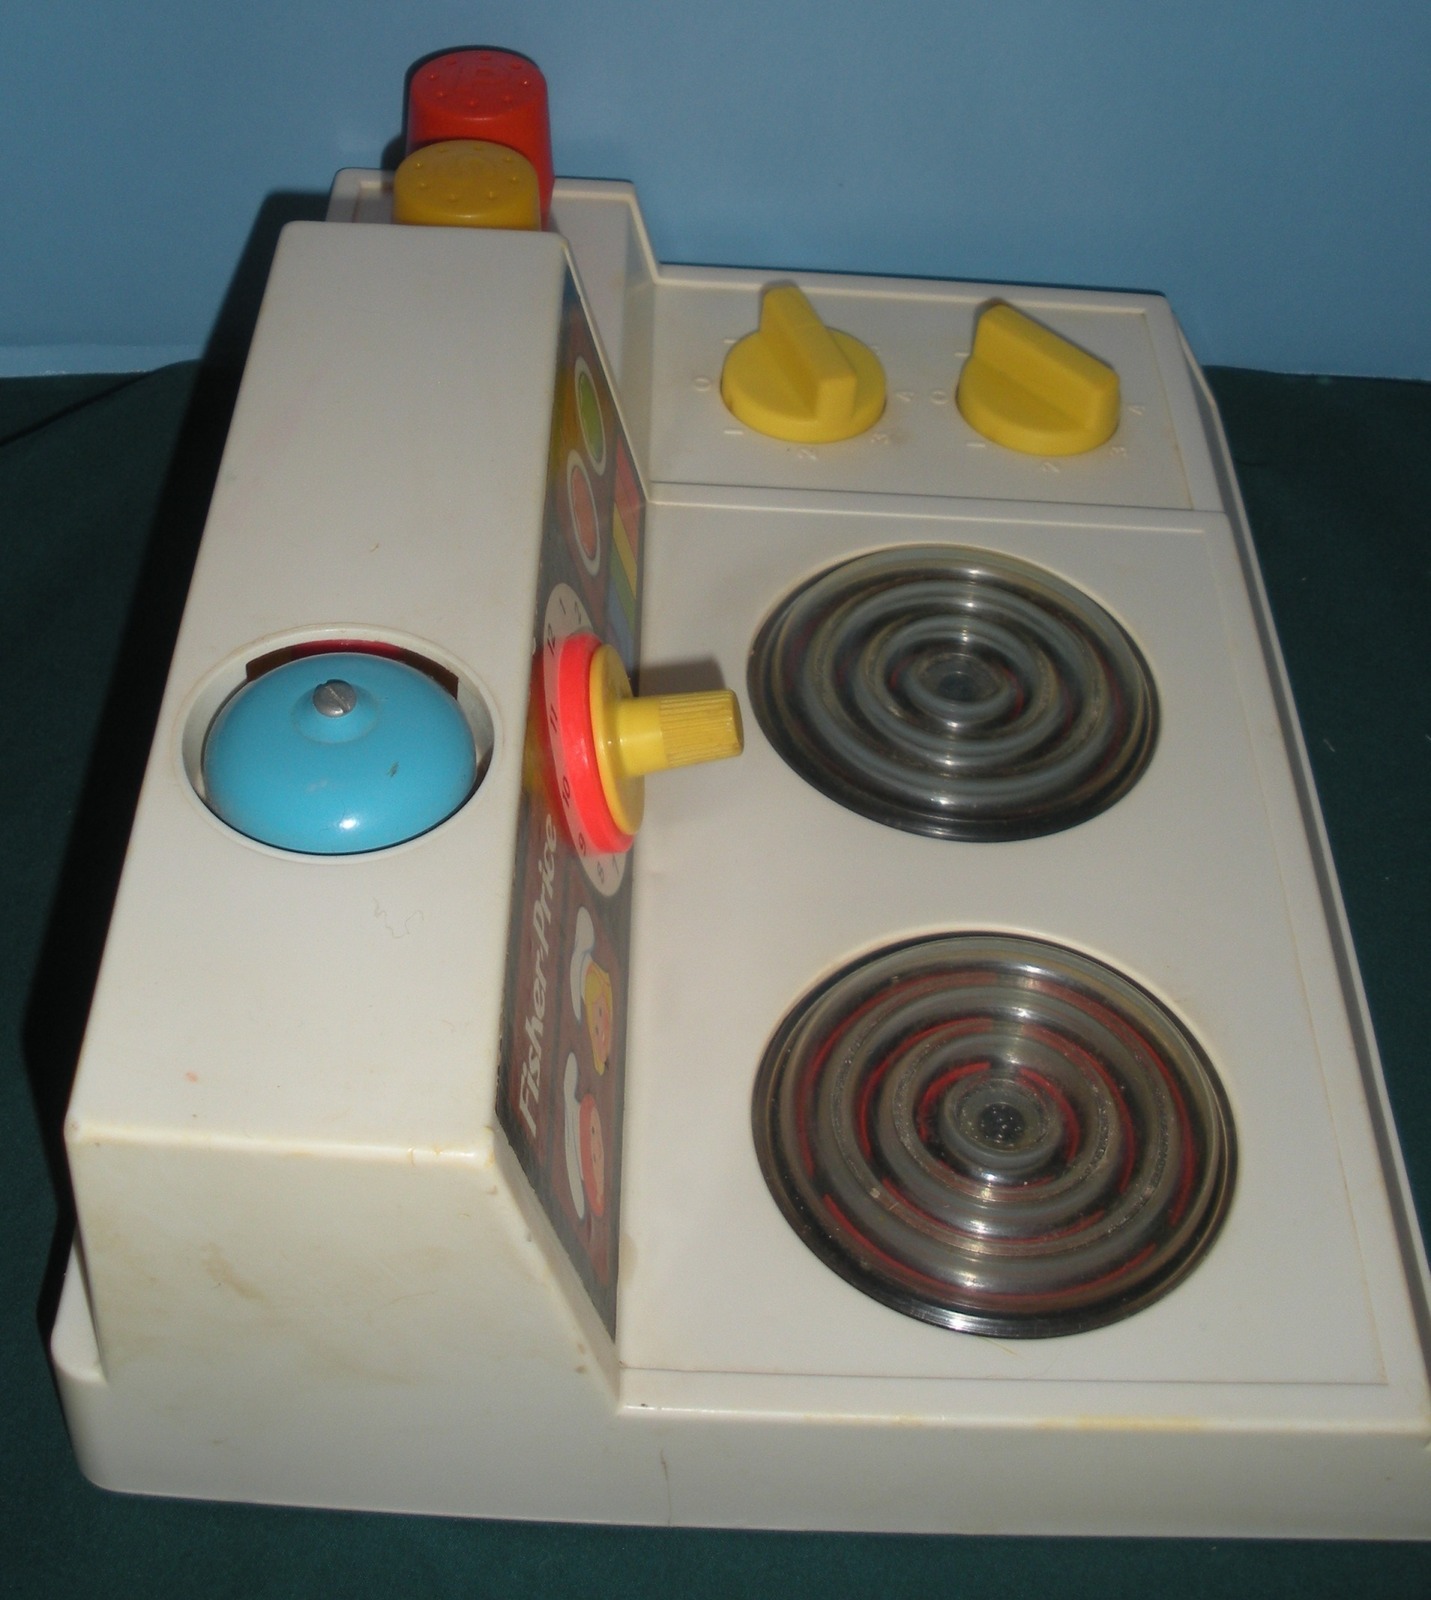 Details about   Vintage Fisher Price Fun w/ Food YELLOW FORK UTENSIL PIECE Magic Burner Stove 